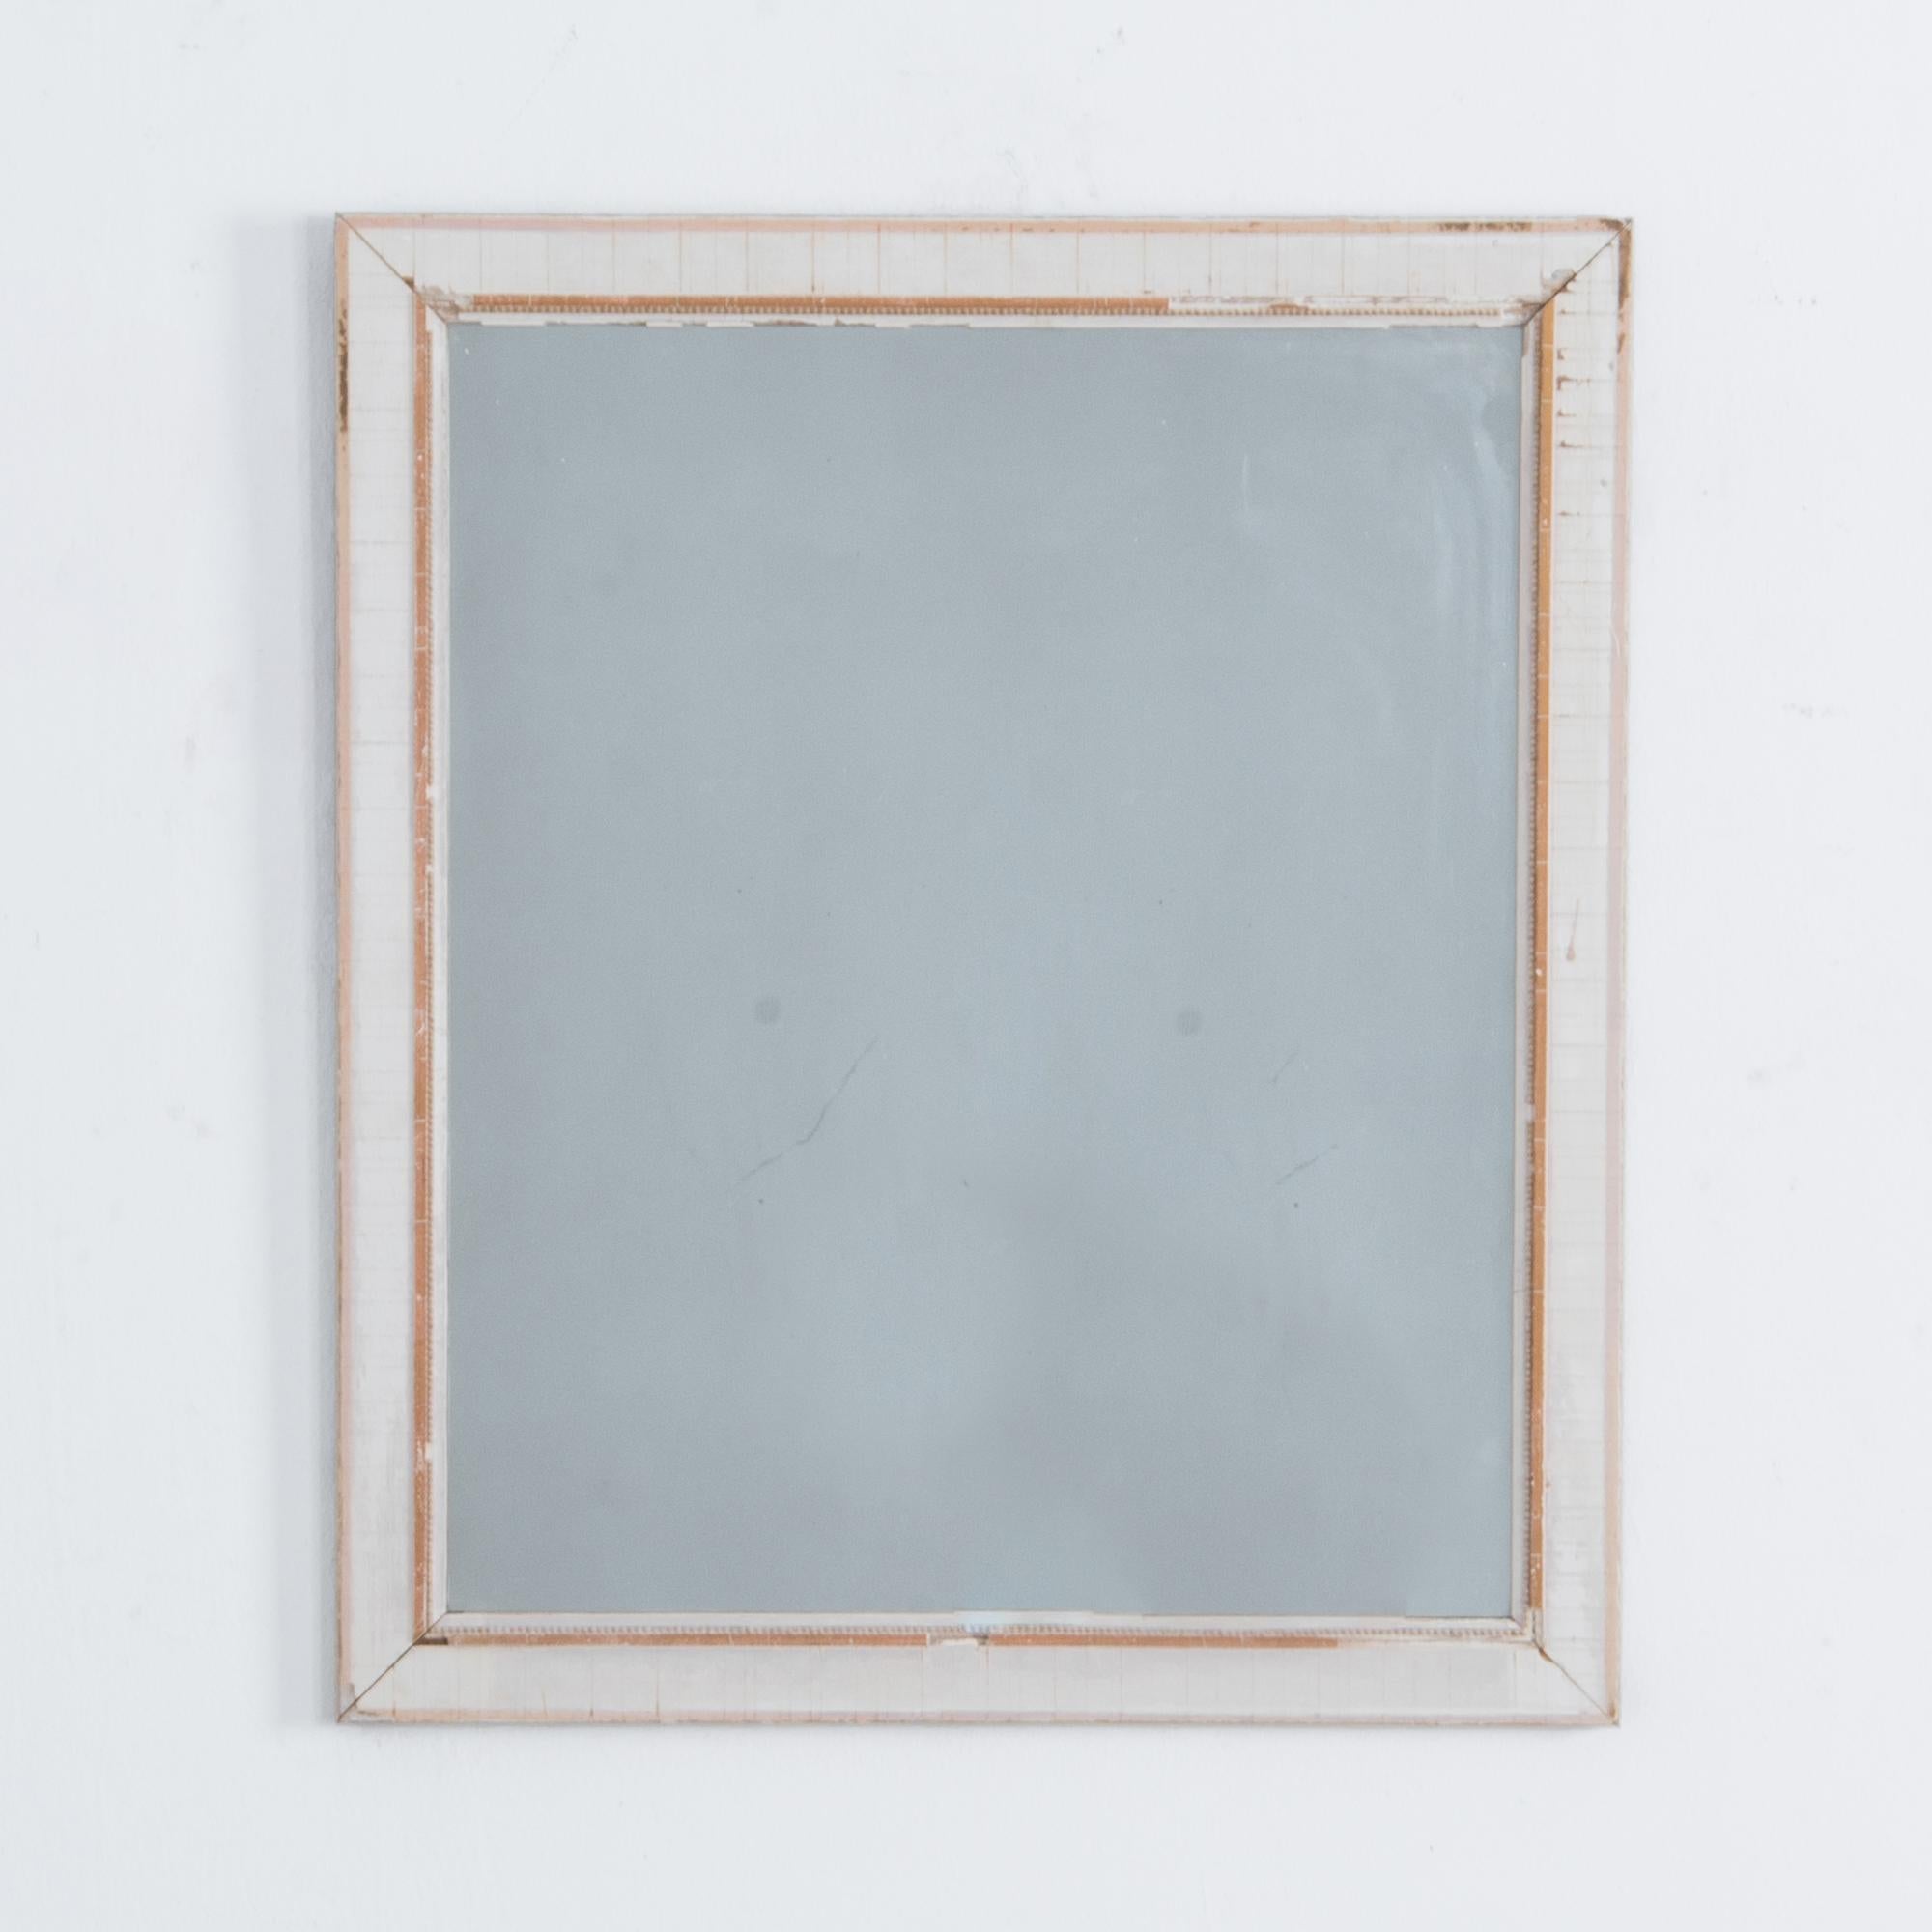 From France, circa 1900 this pared down white frame charms in spaces simple or ornate. Inset with traditional plaster molding, painted, and carefully gold-leafed, this frame blends delicate ornament and traditional technique for a restrained and